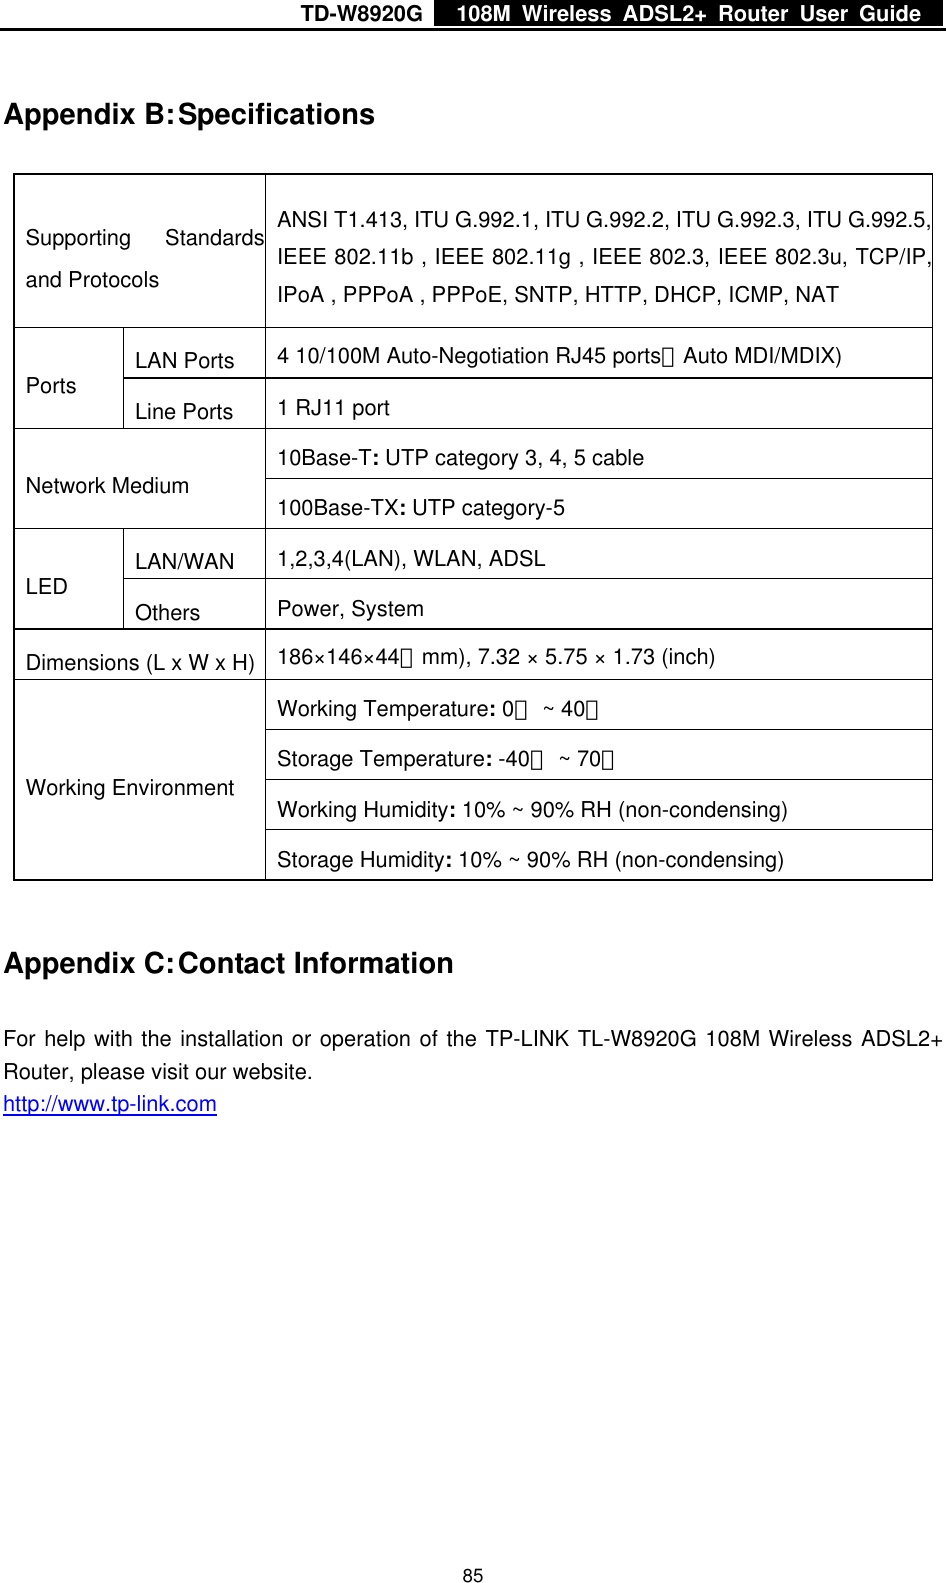 TD-W8920G    108M Wireless ADSL2+ Router User Guide    85Appendix B: Specifications Supporting Standardsand Protocols ANSI T1.413, ITU G.992.1, ITU G.992.2, ITU G.992.3, ITU G.992.5,IEEE 802.11b , IEEE 802.11g , IEEE 802.3, IEEE 802.3u, TCP/IP,IPoA , PPPoA , PPPoE, SNTP, HTTP, DHCP, ICMP, NAT LAN Ports  4 10/100M Auto-Negotiation RJ45 ports（Auto MDI/MDIX) Ports  Line Ports  1 RJ11 port 10Base-T: UTP category 3, 4, 5 cable  Network Medium  100Base-TX: UTP category-5   LAN/WAN  1,2,3,4(LAN), WLAN, ADSL LED  Others  Power, System Dimensions (L x W x H)  186×146×44（mm), 7.32 × 5.75 × 1.73 (inch) Working Temperature: 0 ~ 40℃℃ Storage Temperature: -40℃ ~ 70℃ Working Humidity: 10% ~ 90% RH (non-condensing) Working Environment Storage Humidity: 10% ~ 90% RH (non-condensing) Appendix C: Contact Information For help with the installation or operation of the TP-LINK TL-W8920G 108M Wireless ADSL2+ Router, please visit our website. http://www.tp-link.com 